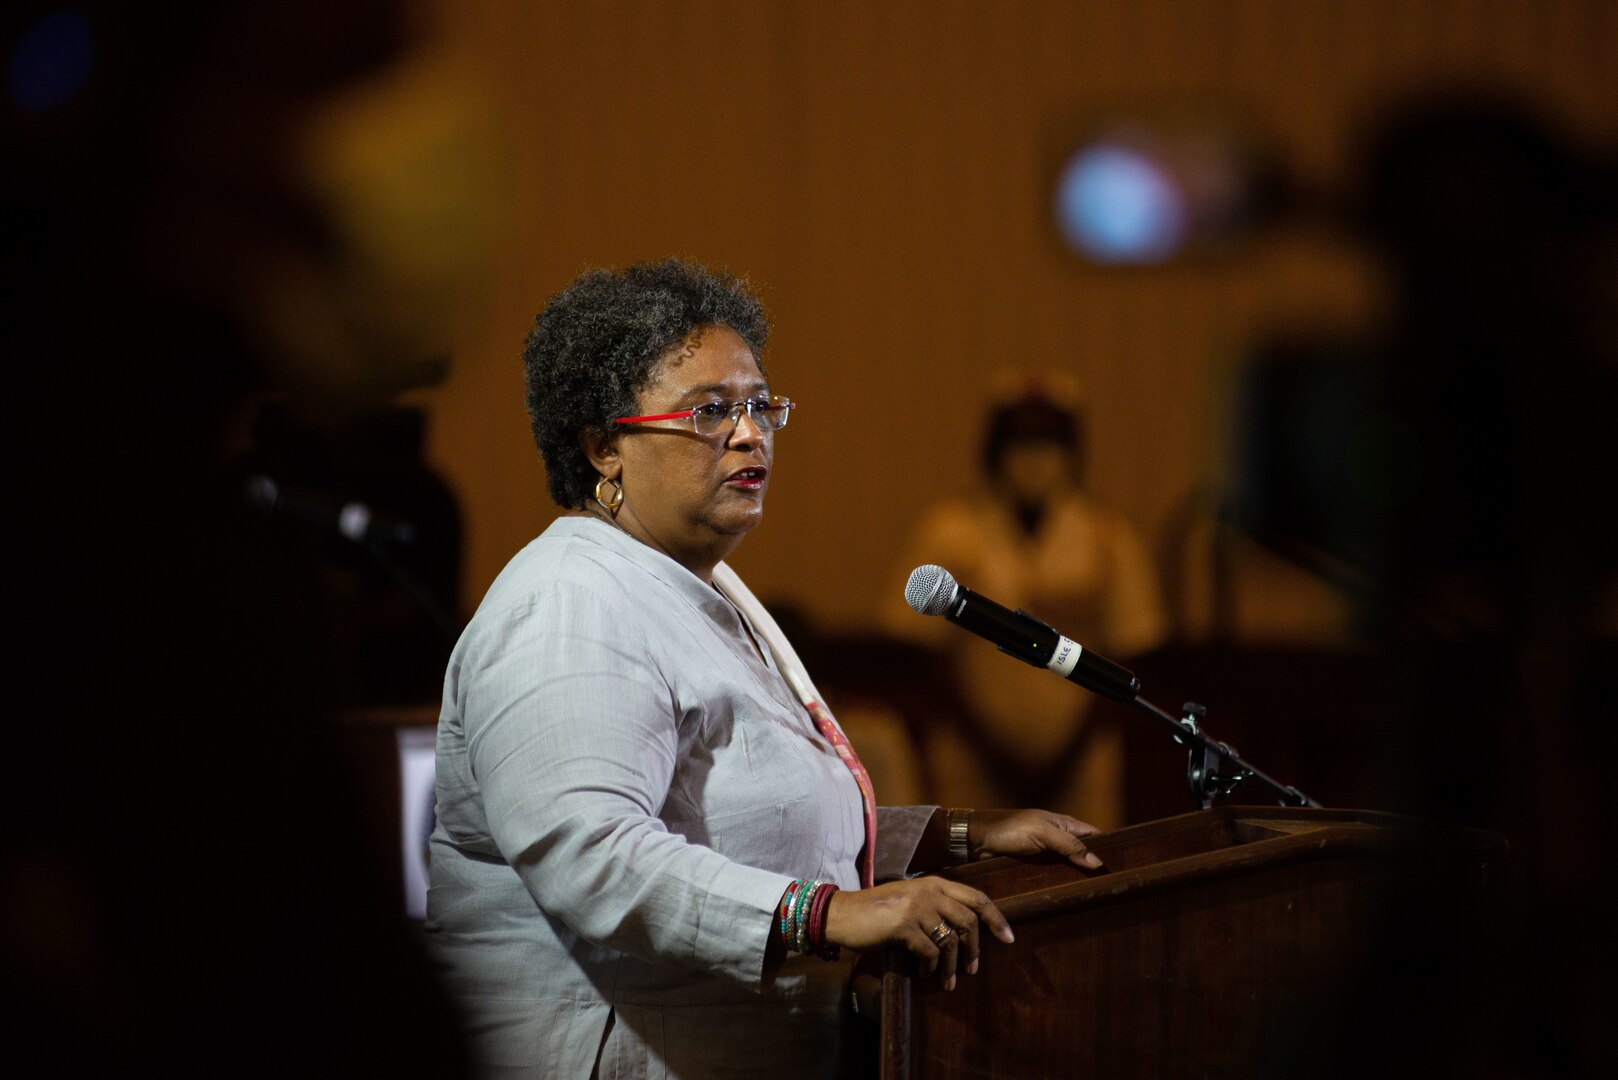 Barbados Prime Minister Mia Mottley delivers opening remarks for the Caribbean Nations Security Conference April 6, 2022 in Bridgetown, Barbados.